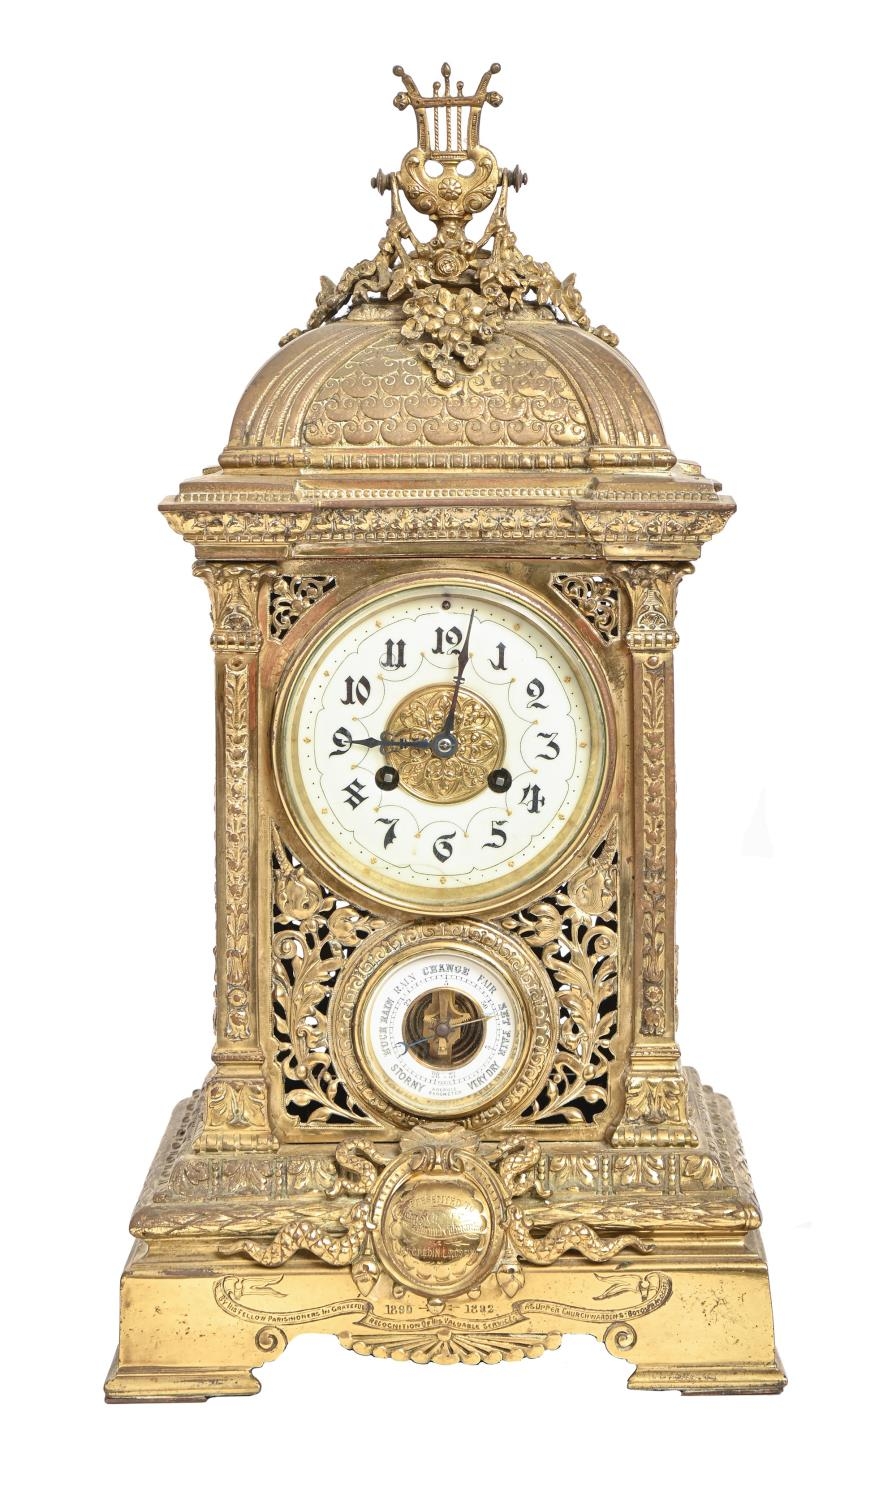 A French cast brass mantel clock, late 19th c, with aneroid barometer and primrose enamel dial, in